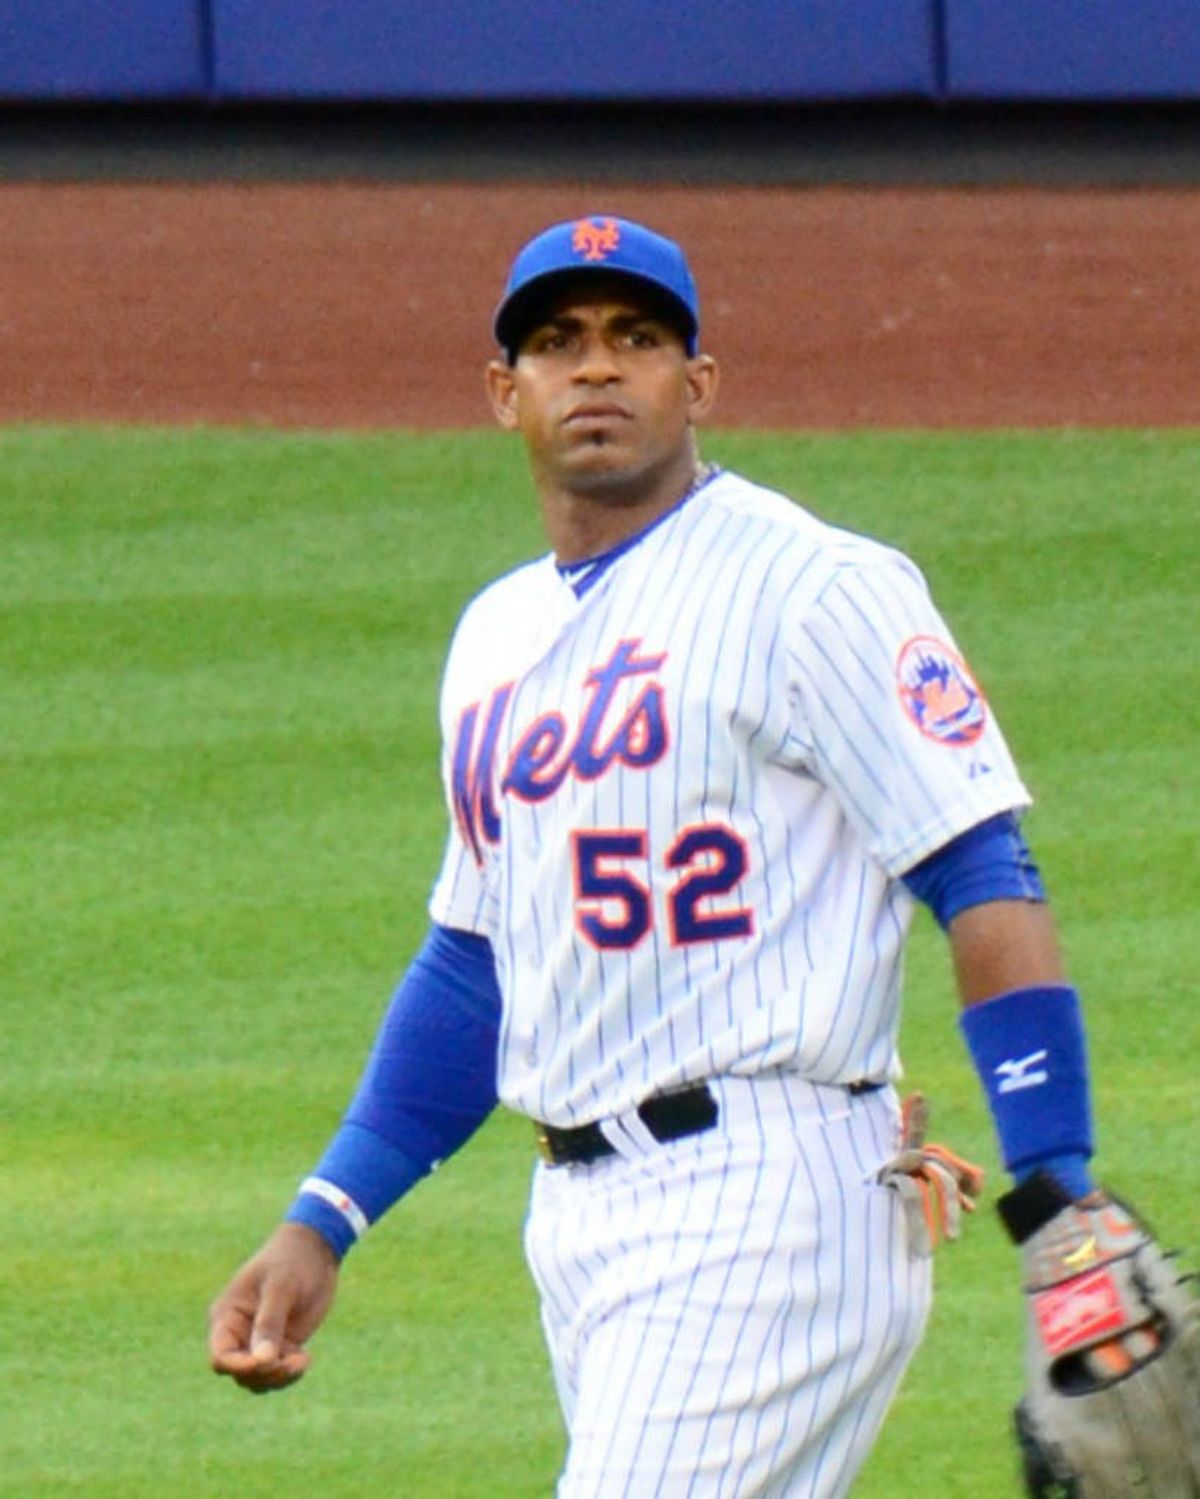 The Mets Have Signed Yoenis Cespedes… Now What?